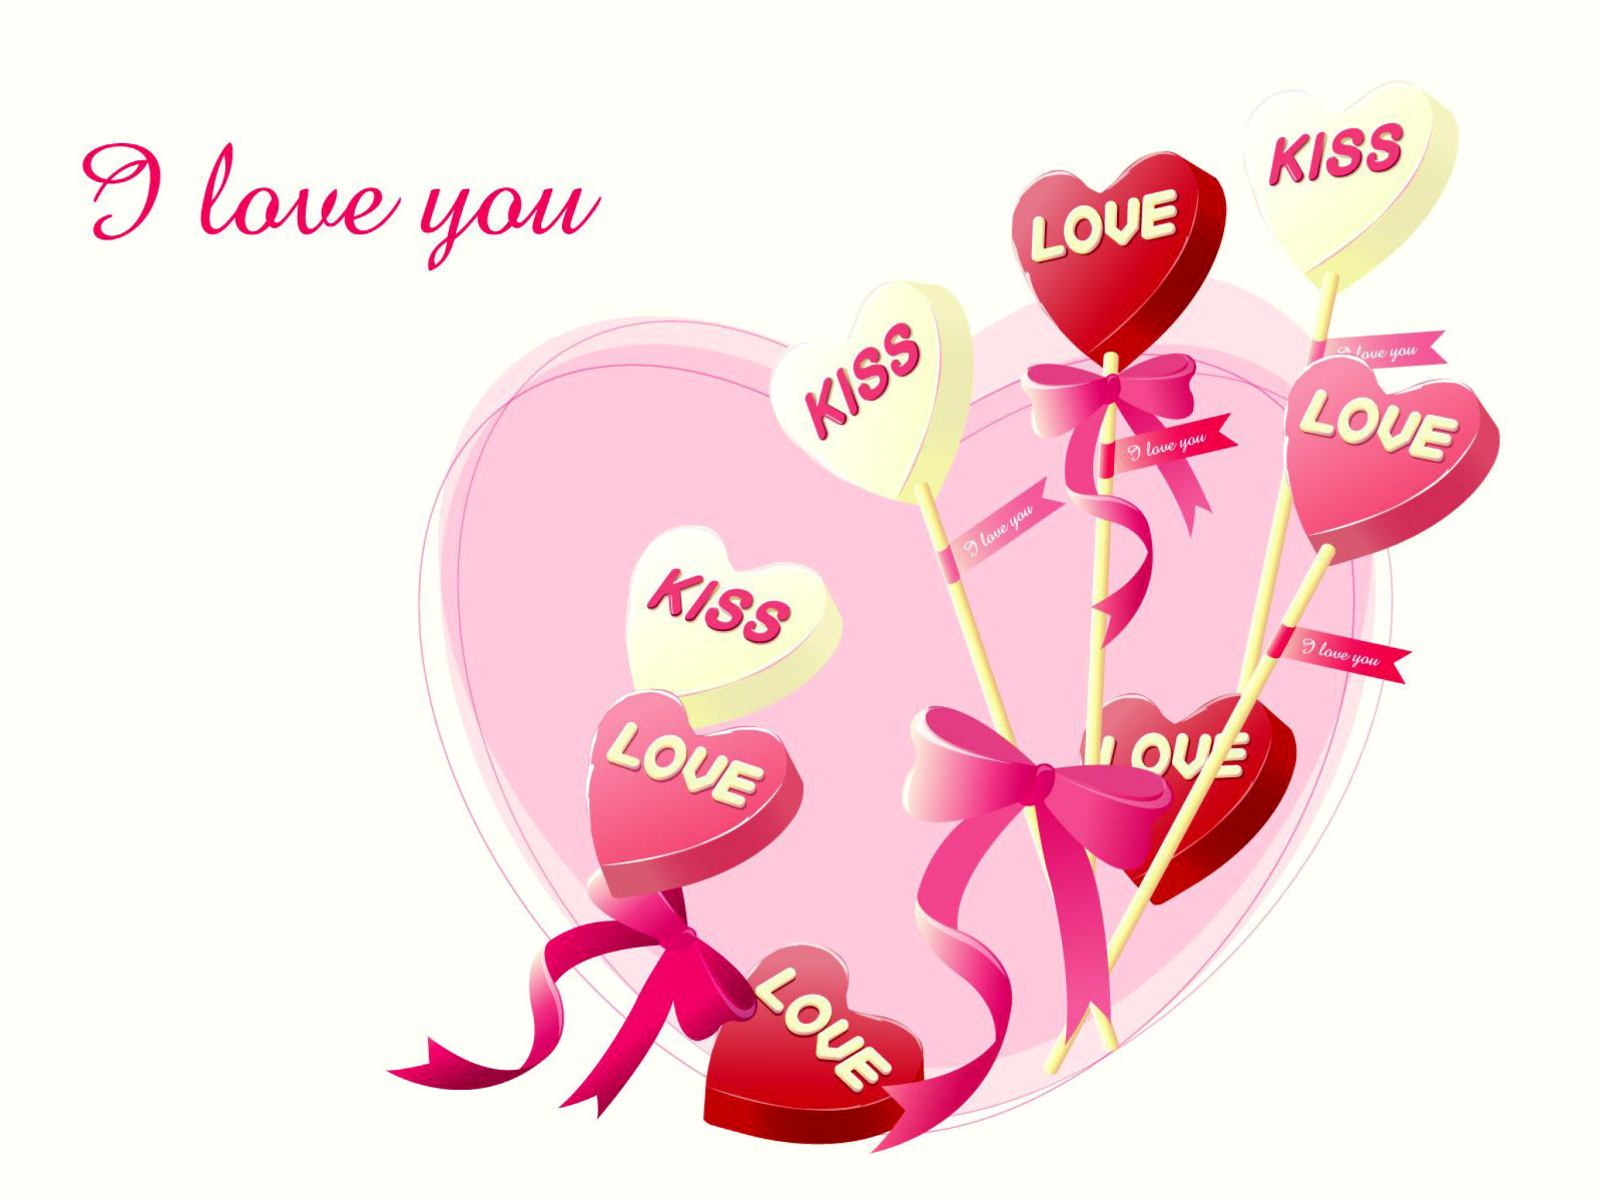 I Love You Balloons and Hearts wallpaper 1600x1200